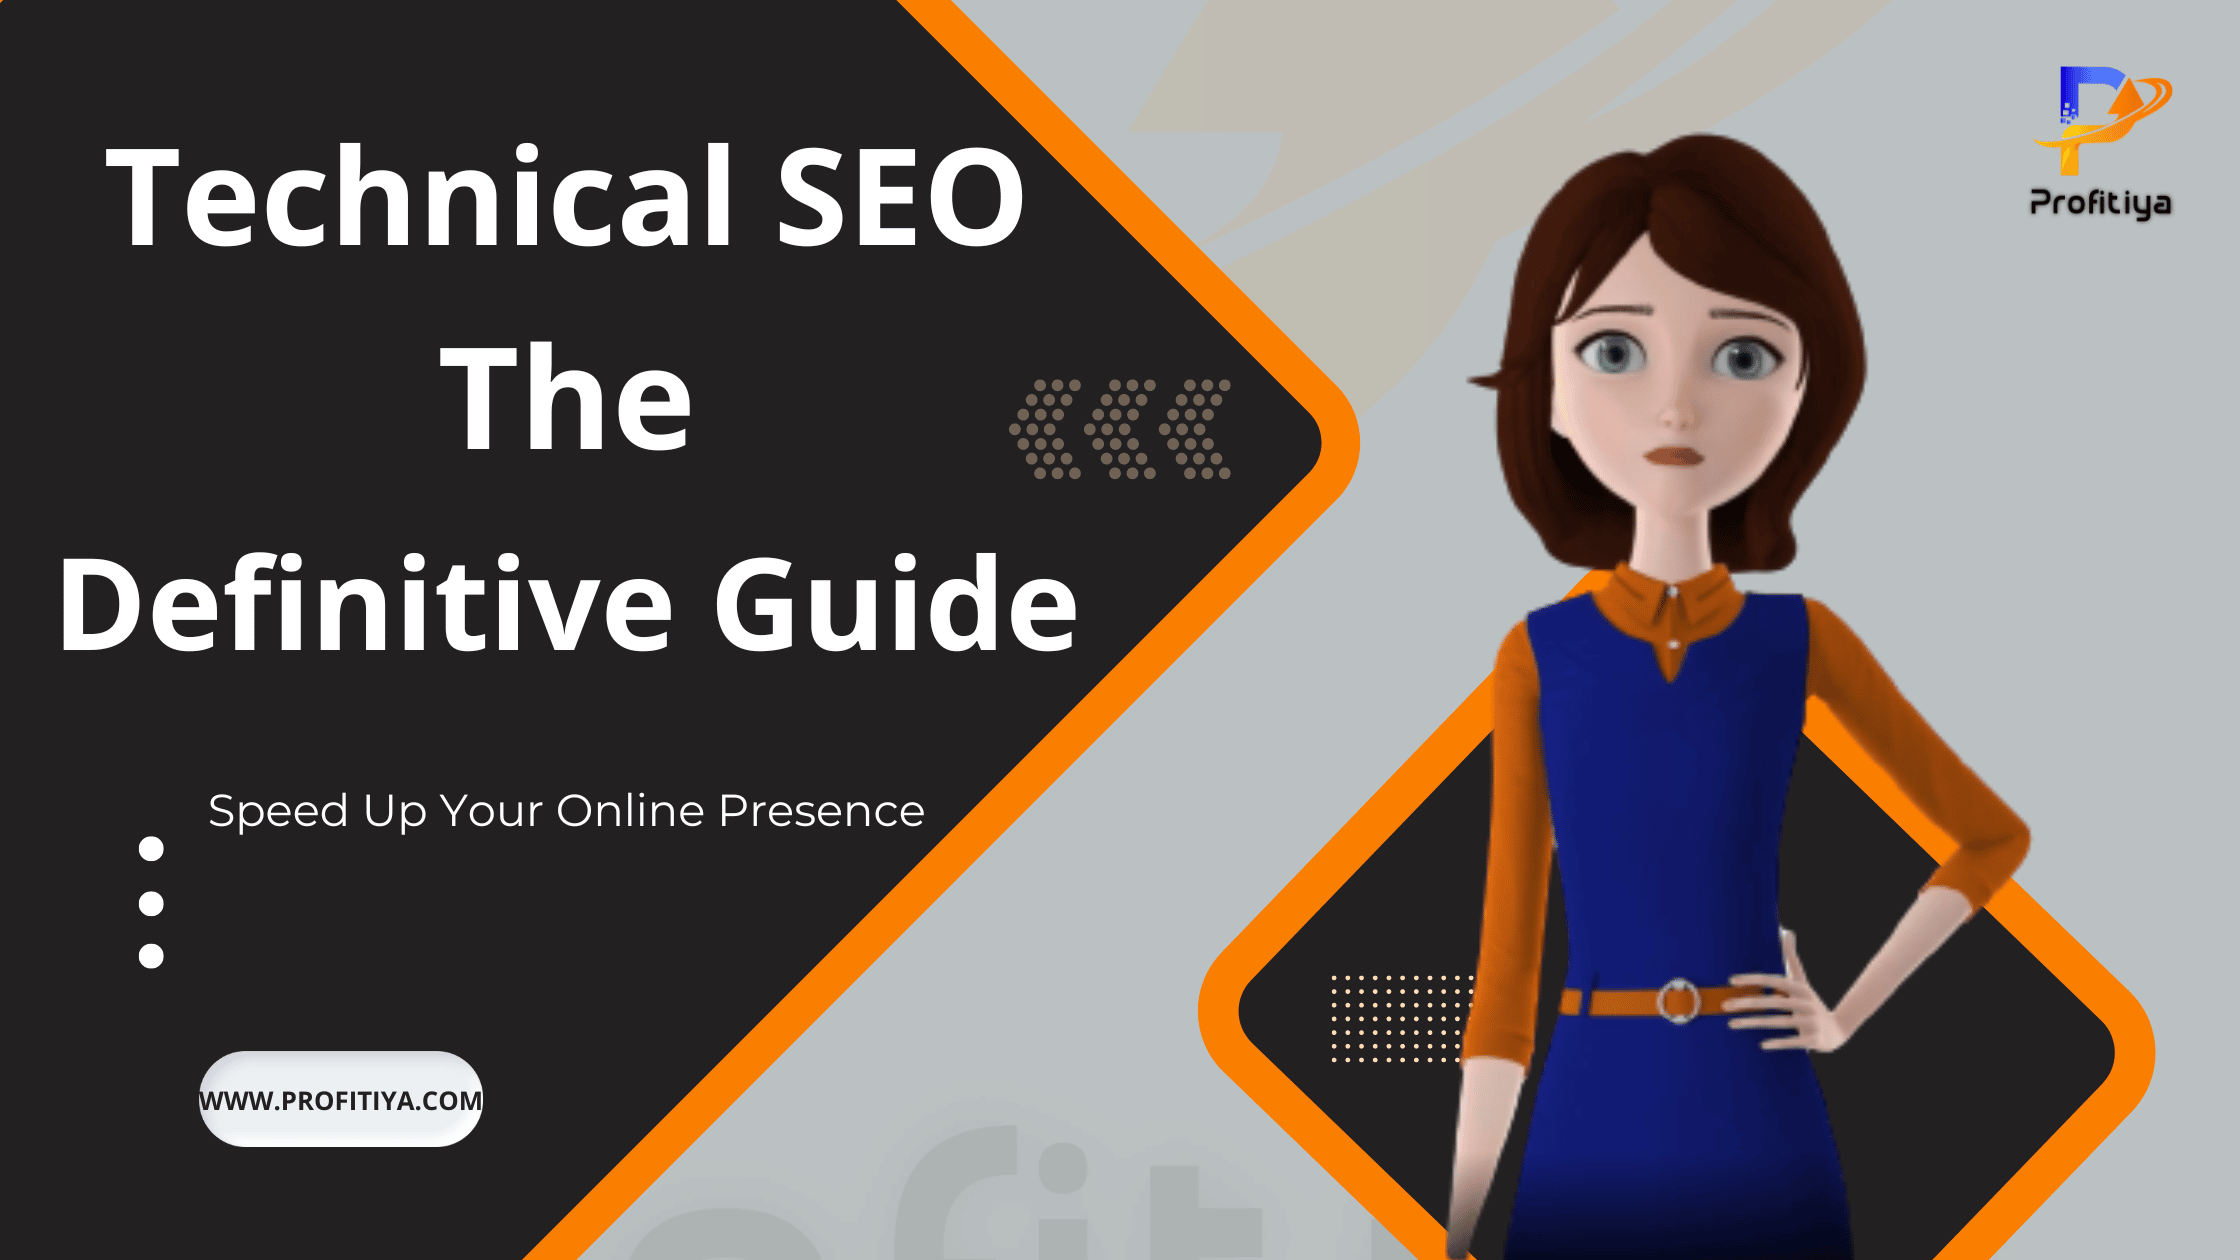 Technical SEO - The Definitive Guide